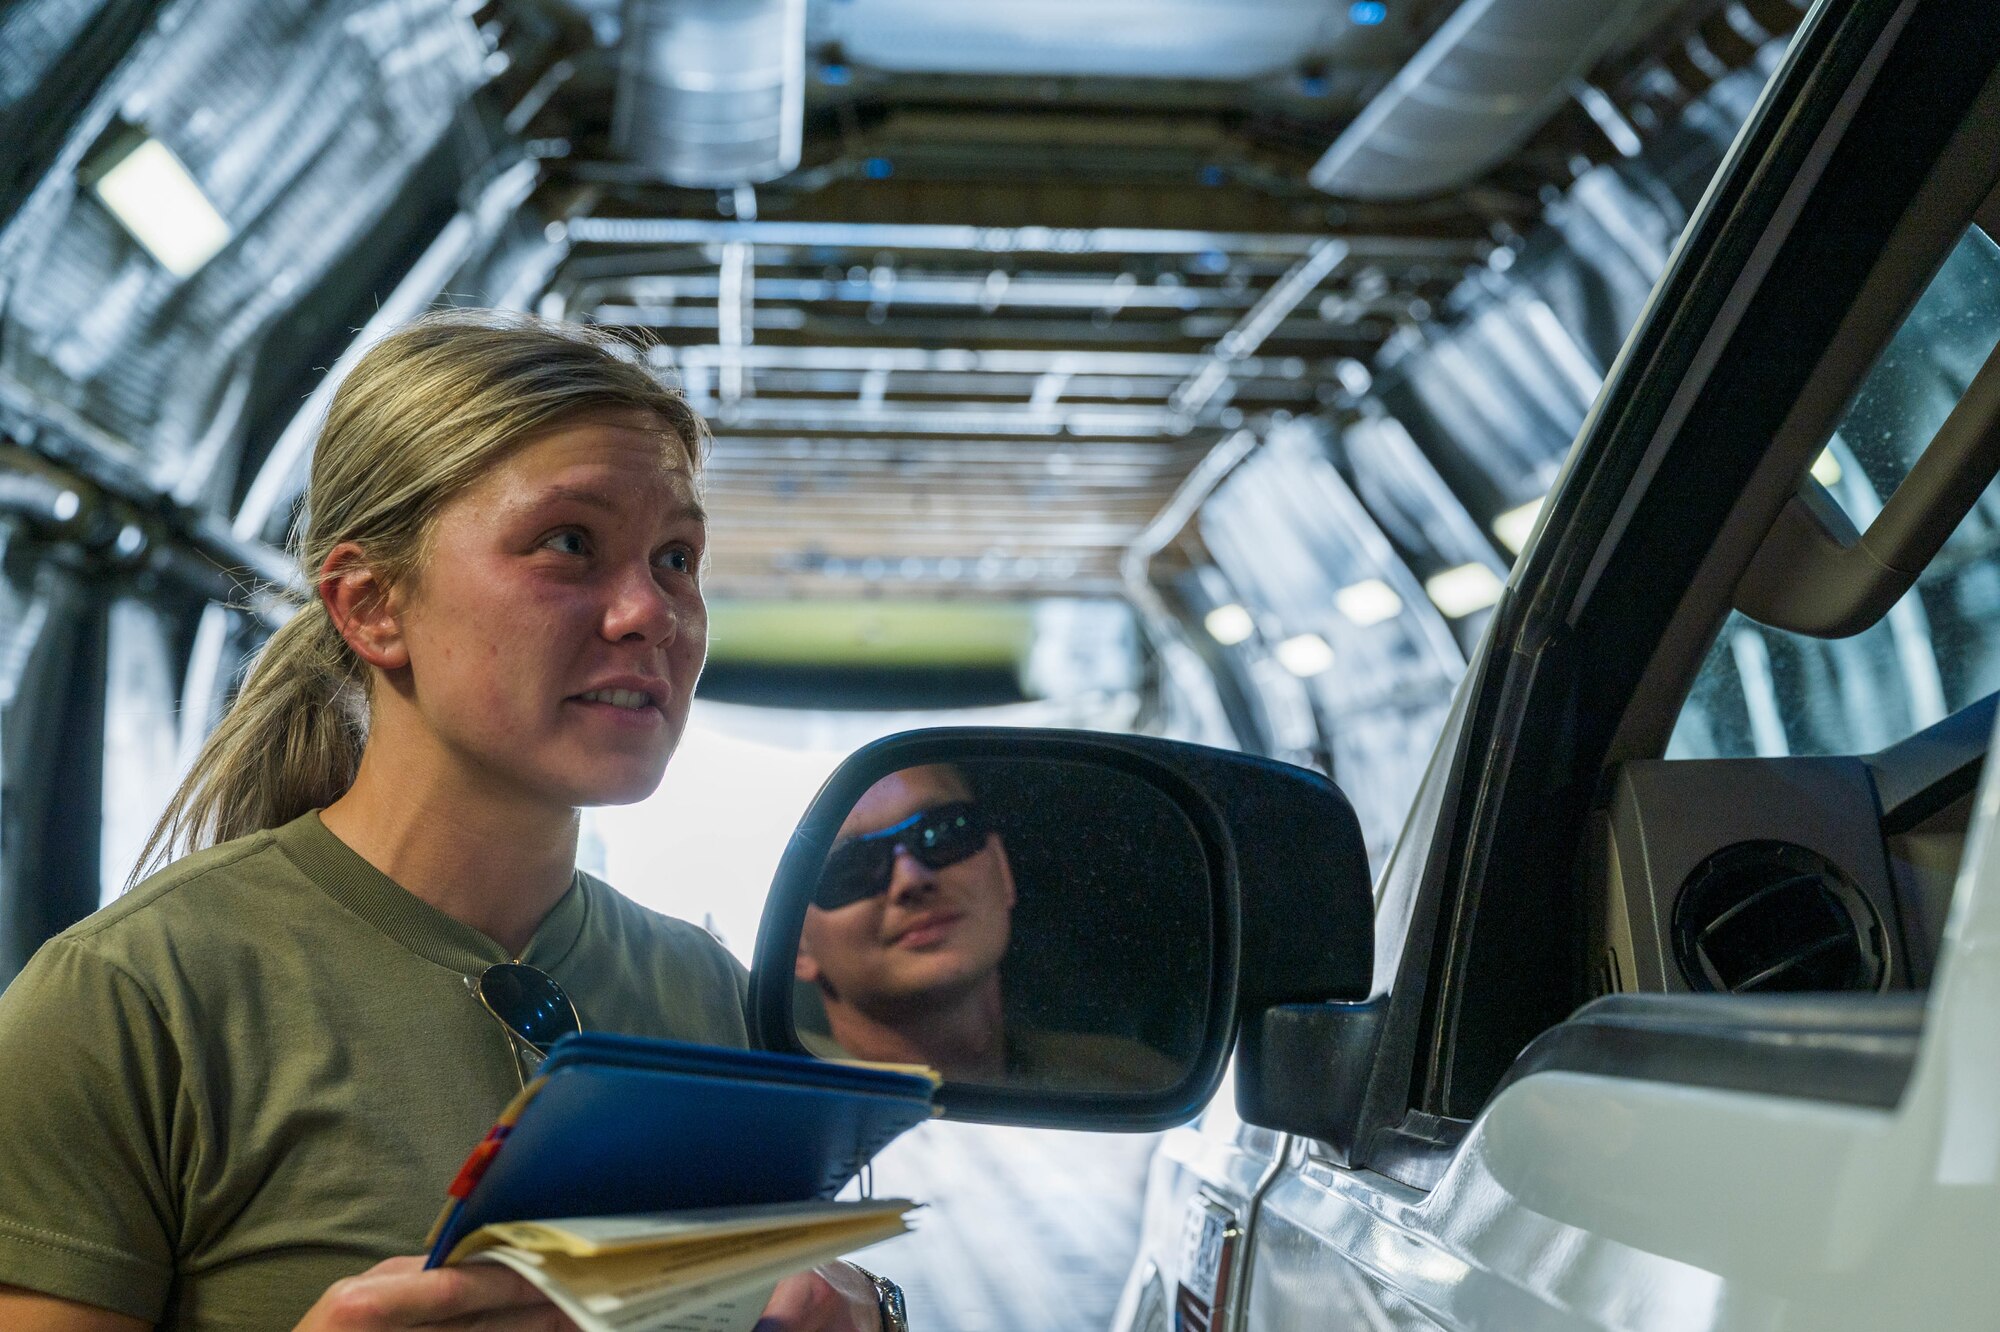 Airman 1st Class Rebecca Reimer, 9th Airlift Squadron loadmaster student, discusses offloading procedures with Staff Sgt. Jordan Chandanais, 49th Logistics Readiness Squadron Air Transportation Function supervisor, while aboard a Dover Air Force Base C-5M Super Galaxy during a Major Command Service Tail Trainer at Holloman AFB, New Mexico, June 7, 2021. Following an initiative from Air Mobility Command, MSTTs have been in the training plan of the 9th AS since early 2021 to expedite upgrade and qualification training for C-5M Super Galaxy loadmasters and flight engineers. This MSTT was coordinated in partnership with Air Education Training Command’s 49th Wing and Air Force Materiel Command’s 635th Materiel Maintenance Group. (U.S. Air Force photo by Senior Airman Faith Schaefer)